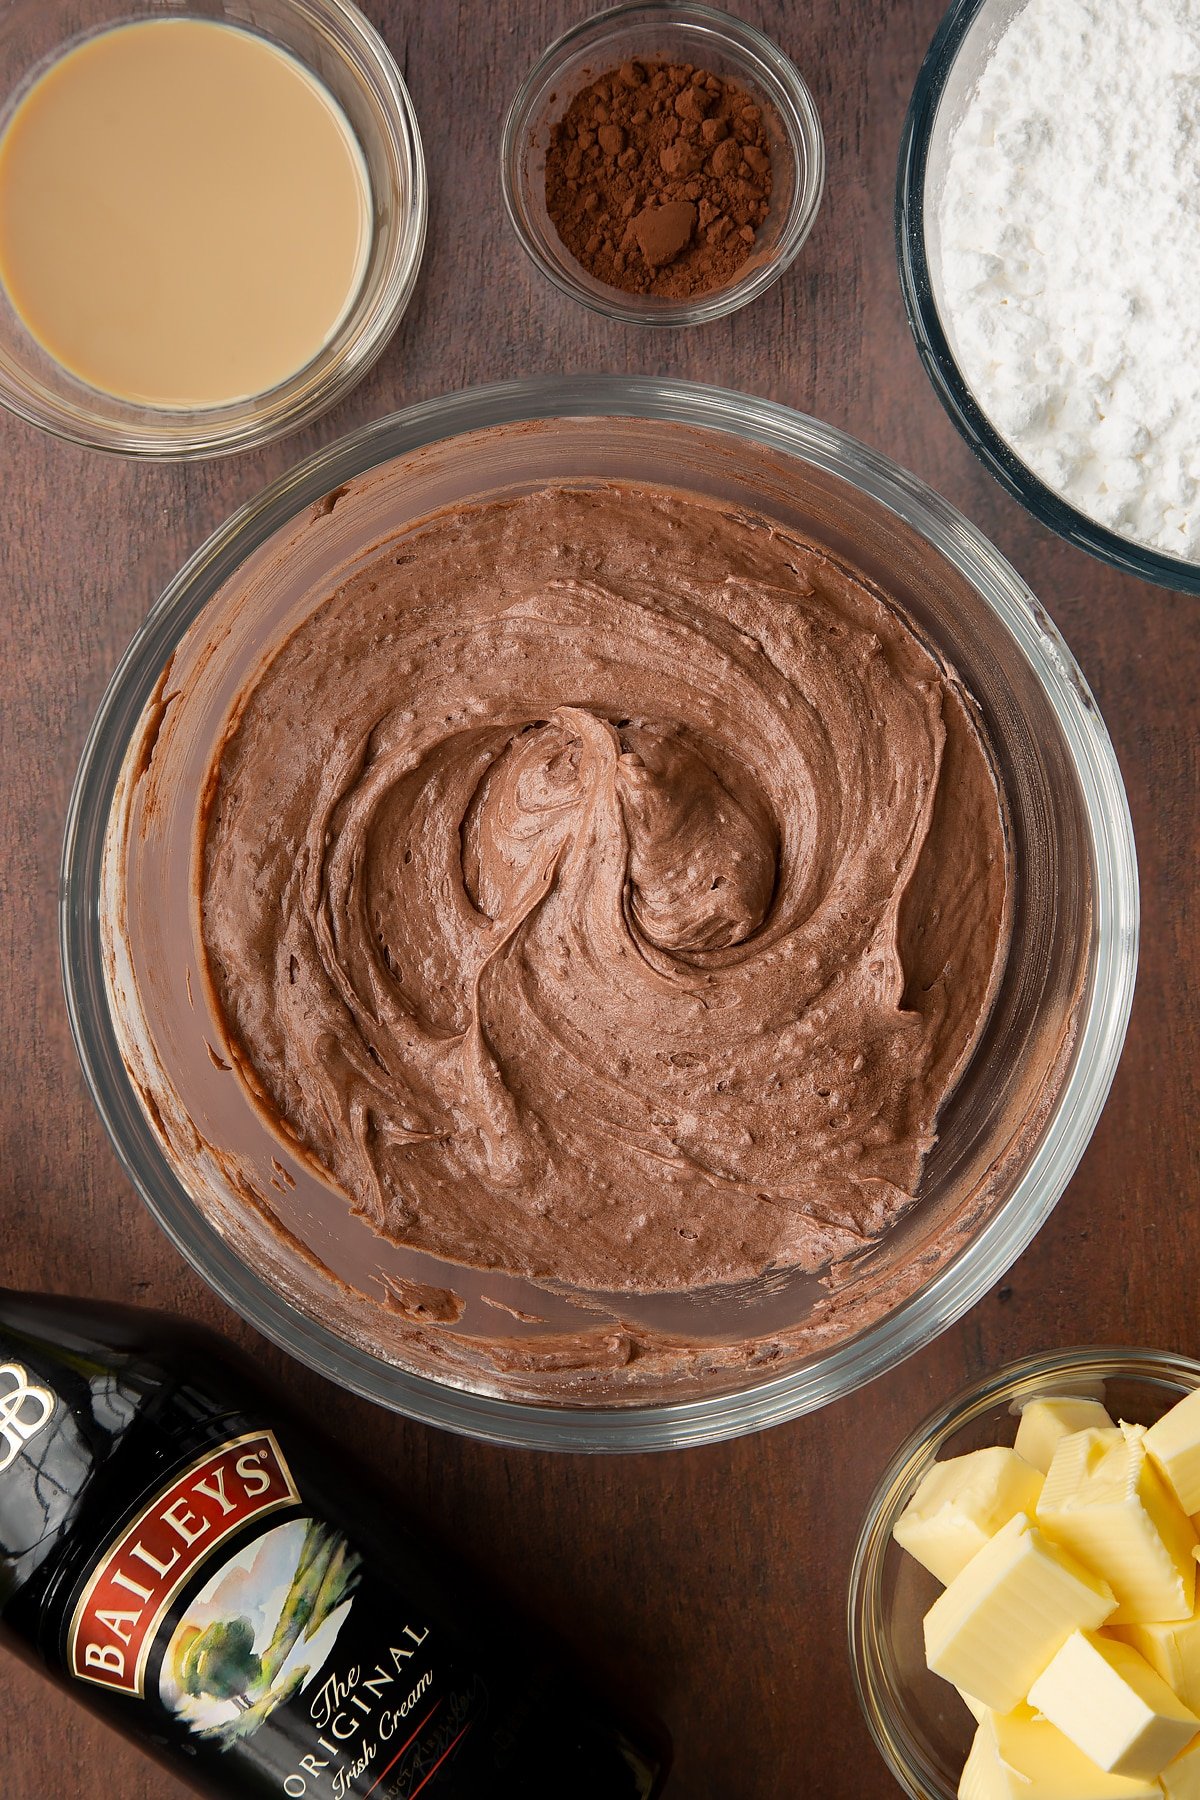 Baileys chocolate cupcake batter in a glass mixing bowl. Ingredients to make Baileys chocolate cupcakes surround the bowl.